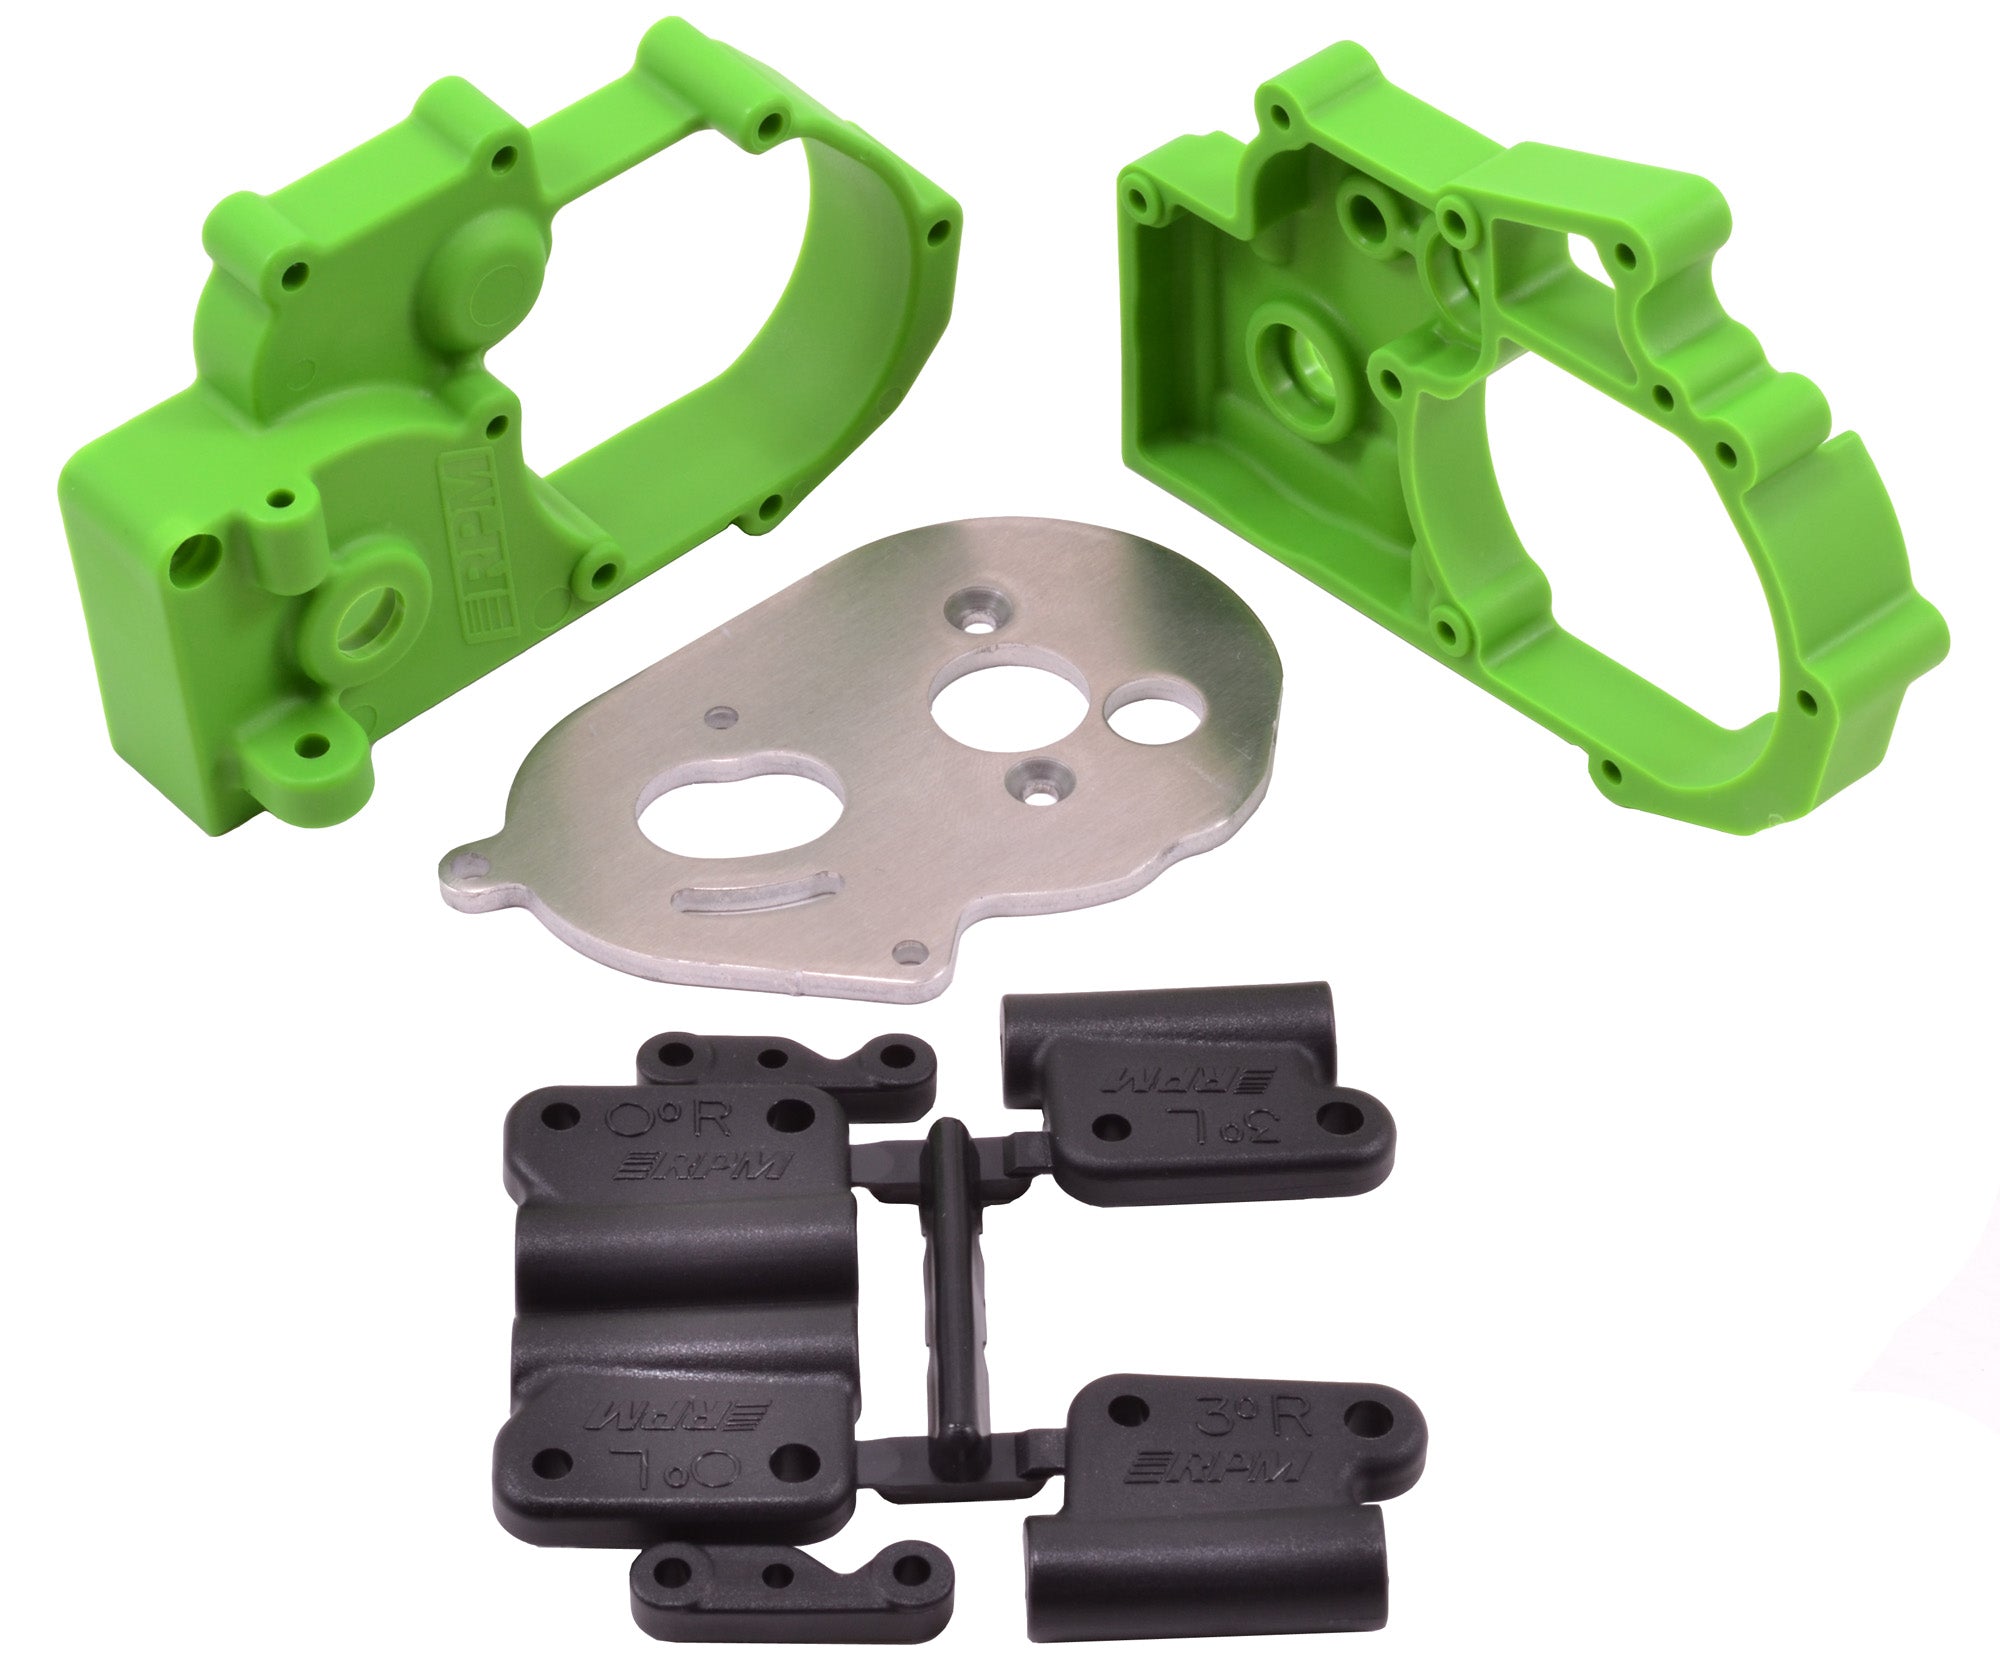 RPM RC Products: Gearbox Housing and Rear Mounts for the Traxxas Slash 2wd, e-Rustler, e-Stampede & Bandit